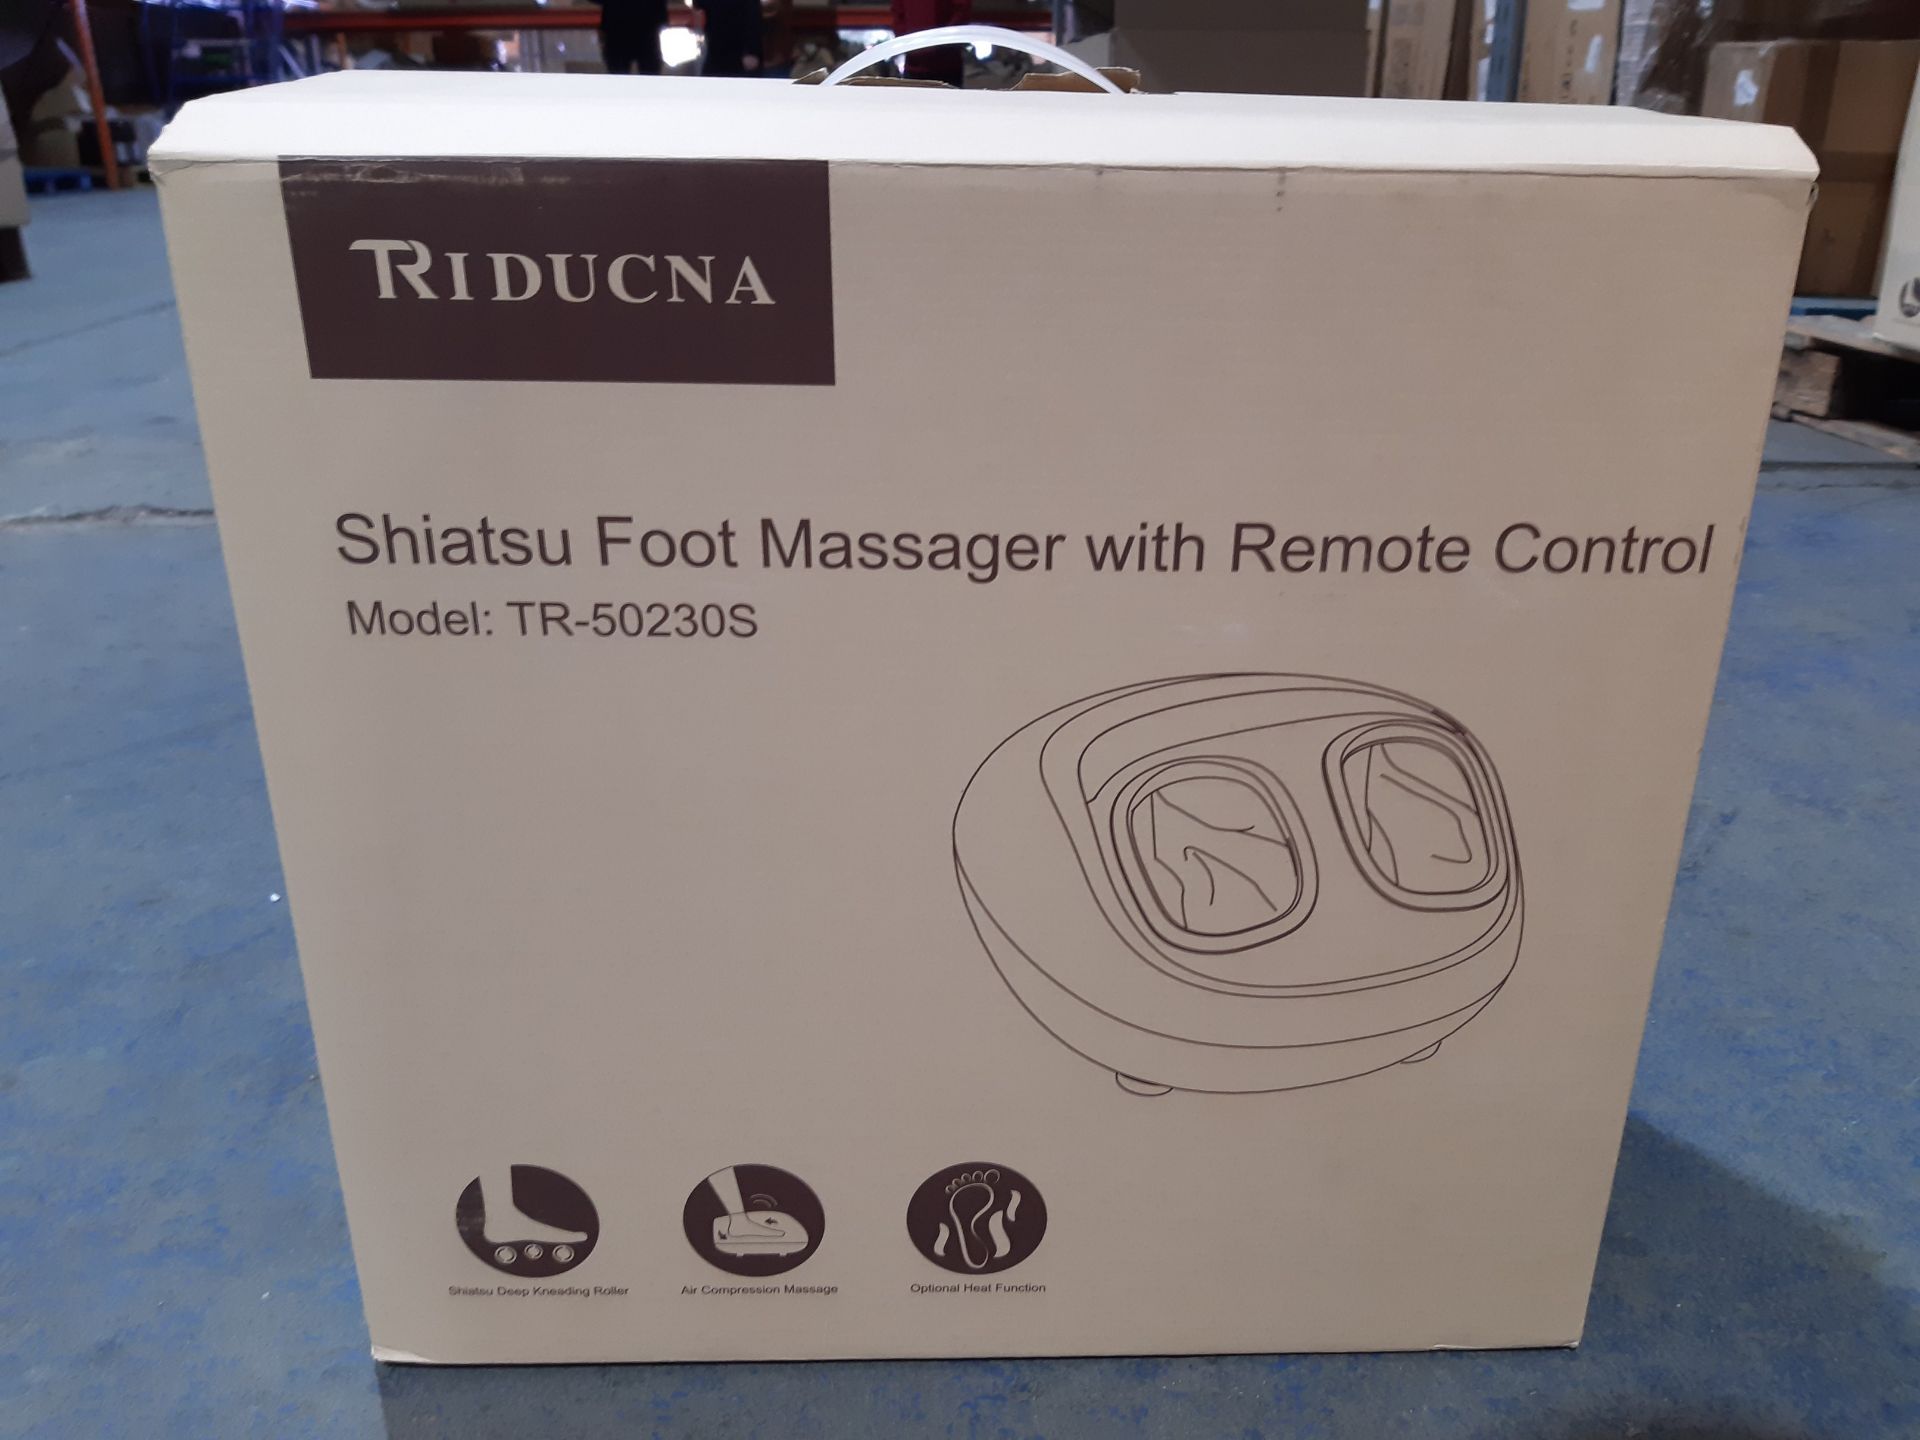 RRP £89.98 Shiatsu Foot Massager Machine with Heat and Remote Control - Image 2 of 2